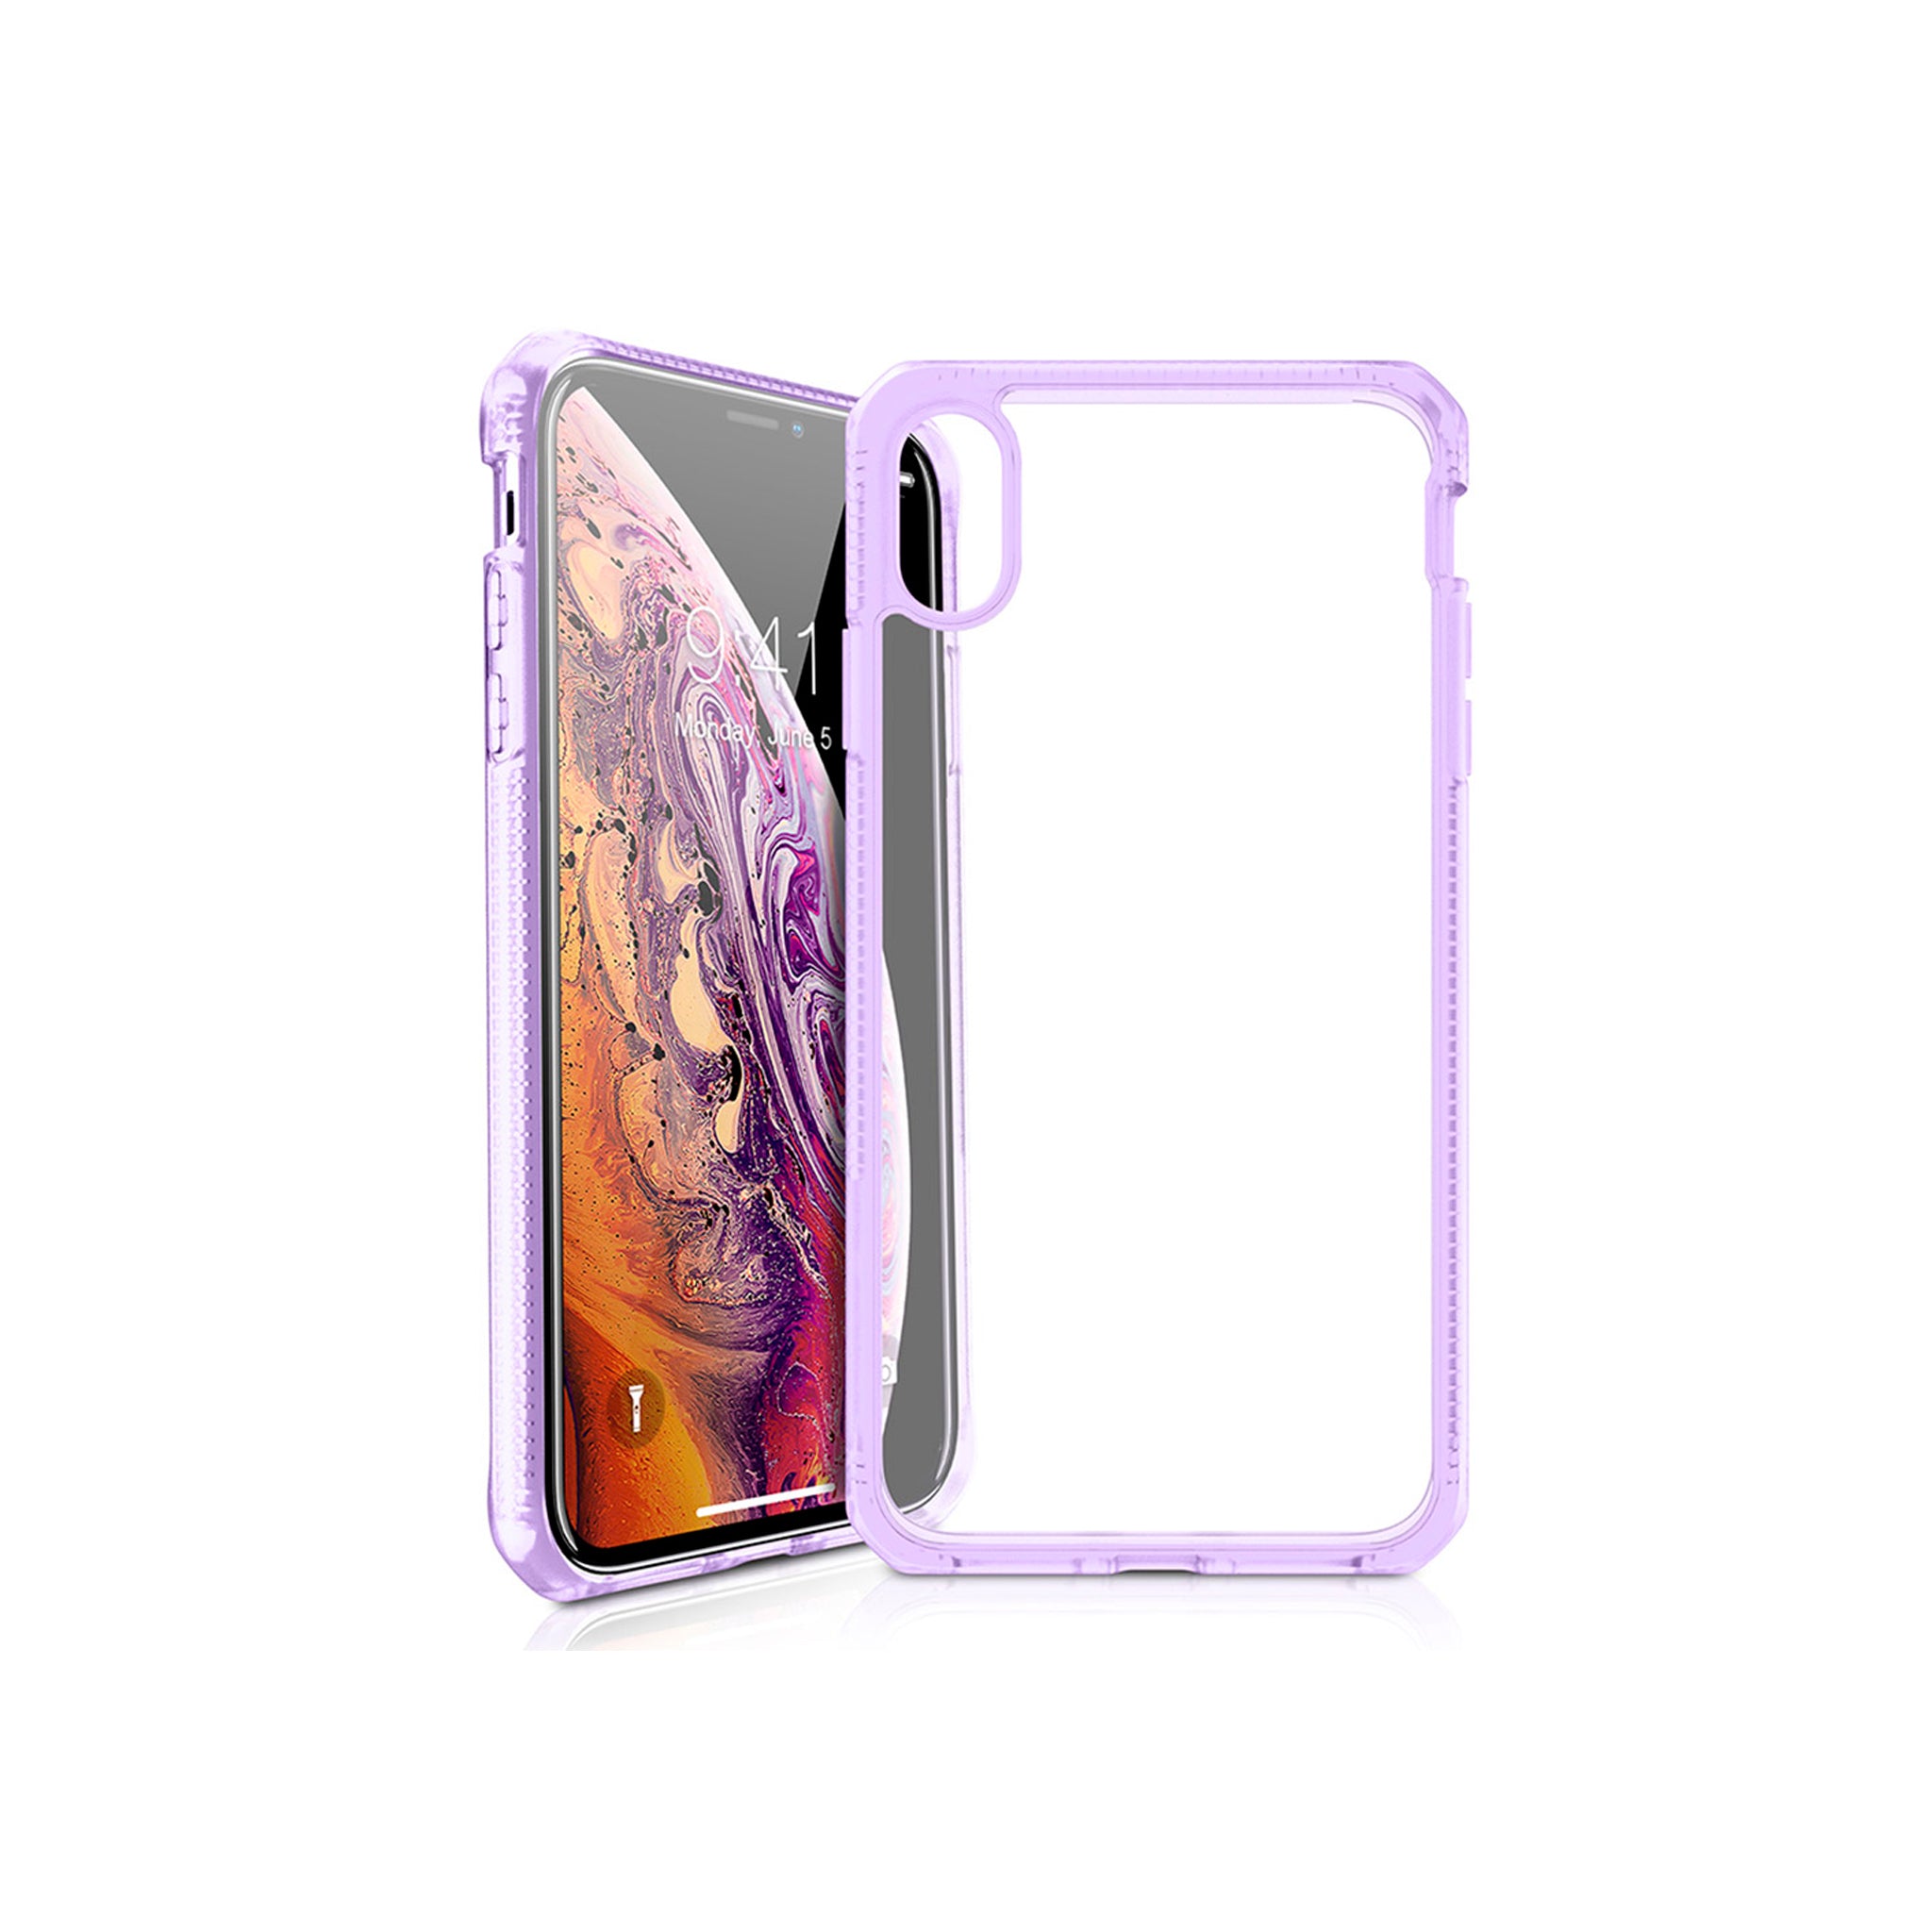 Itskins - Hybrid Frost Mkii Case For Apple Iphone Xs / X - Light Purple And Transparent